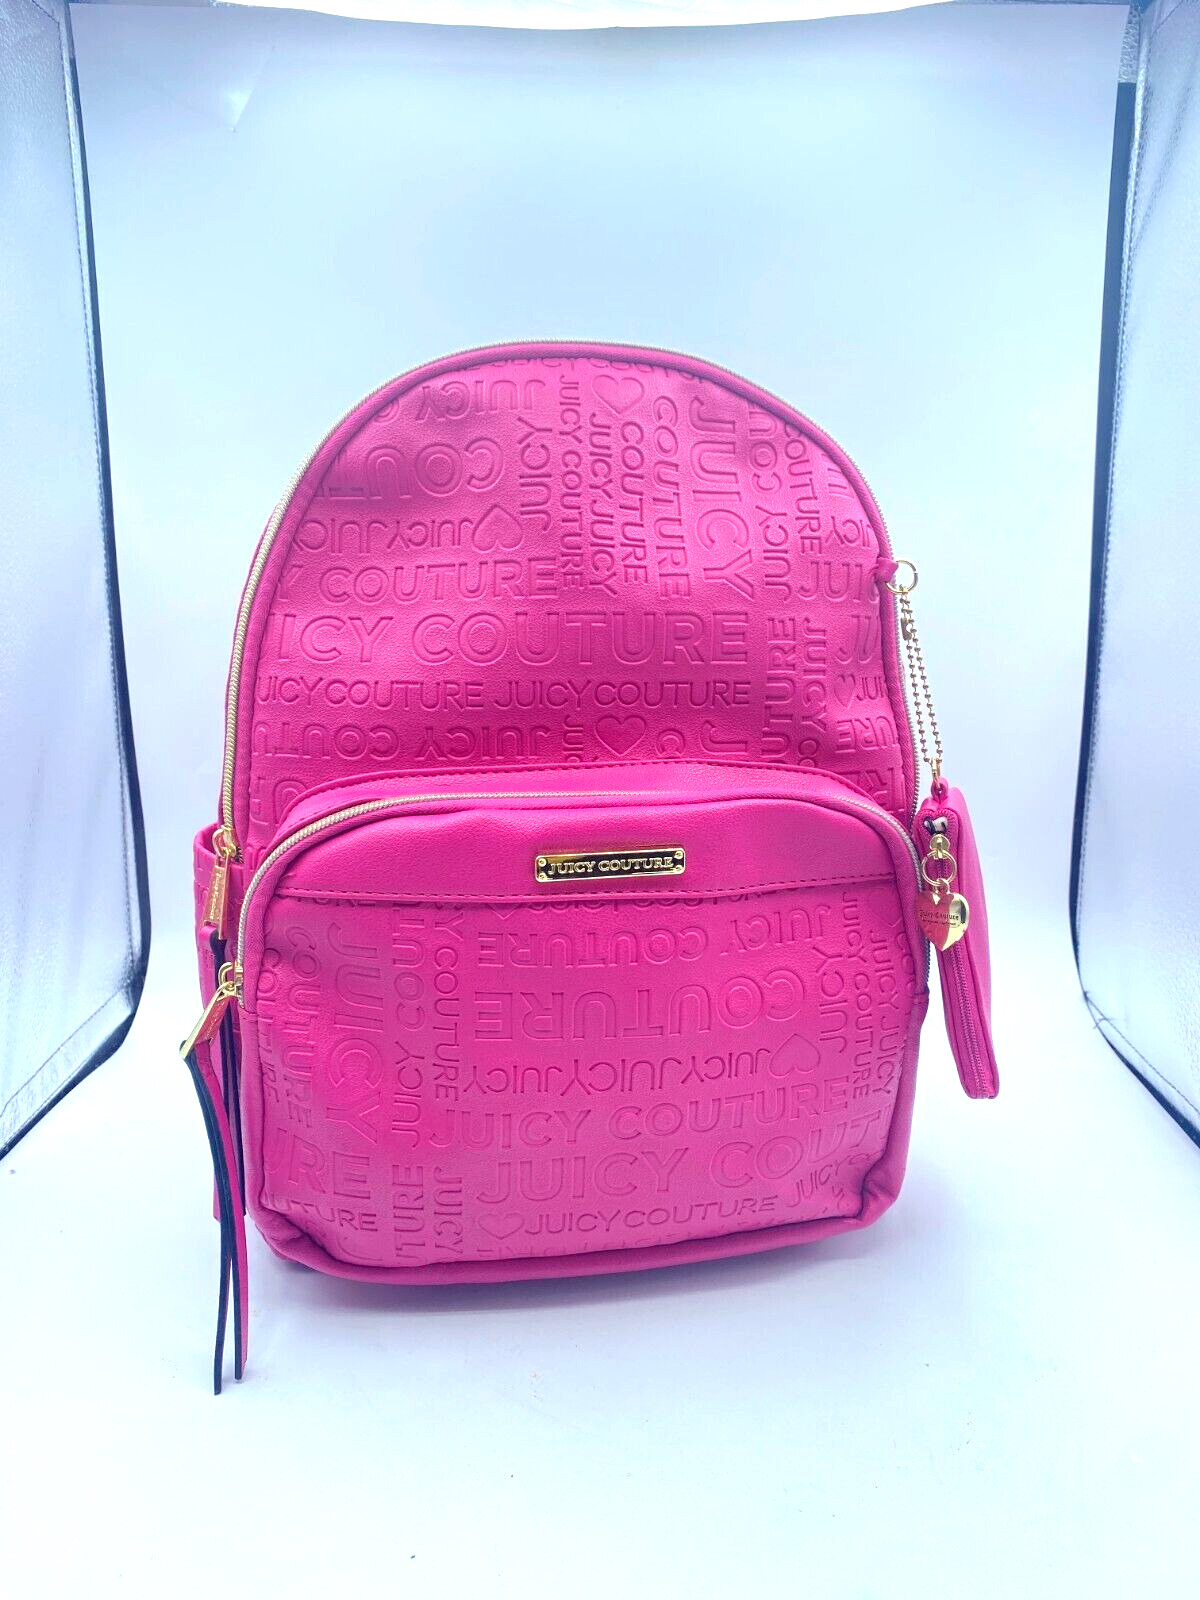 JUICY COUTURE Bag Logo Backpack  With Small Pouch - Hot Pink NWOT